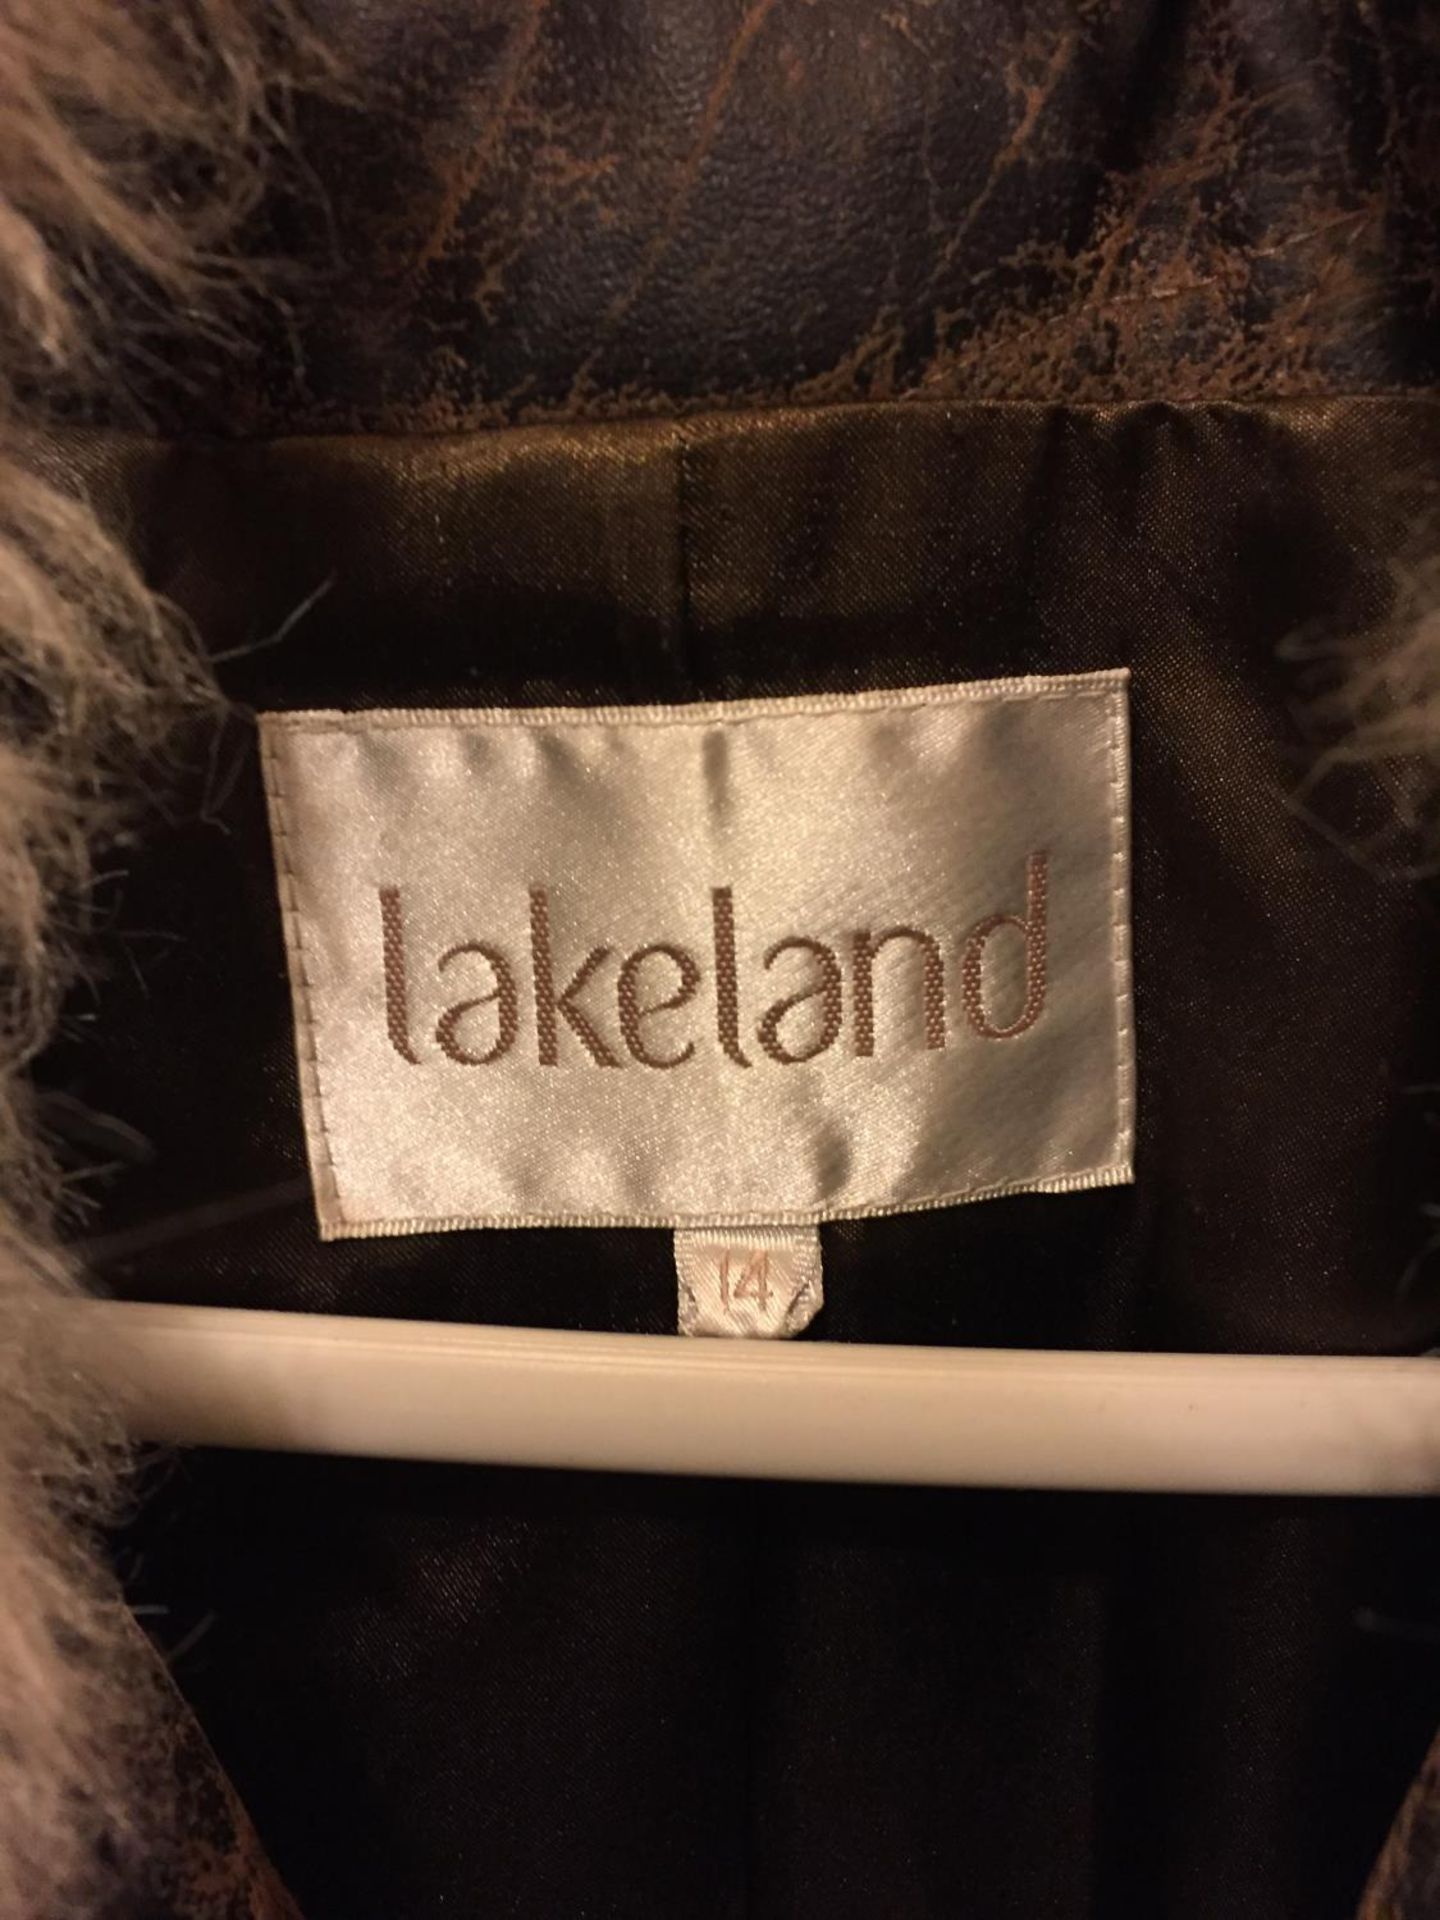 A LADIES LAKELAND COAT SIZE 14 AND A WAREHOUSE FAUX FUR GILET IN A SIZE 16 - Image 5 of 5